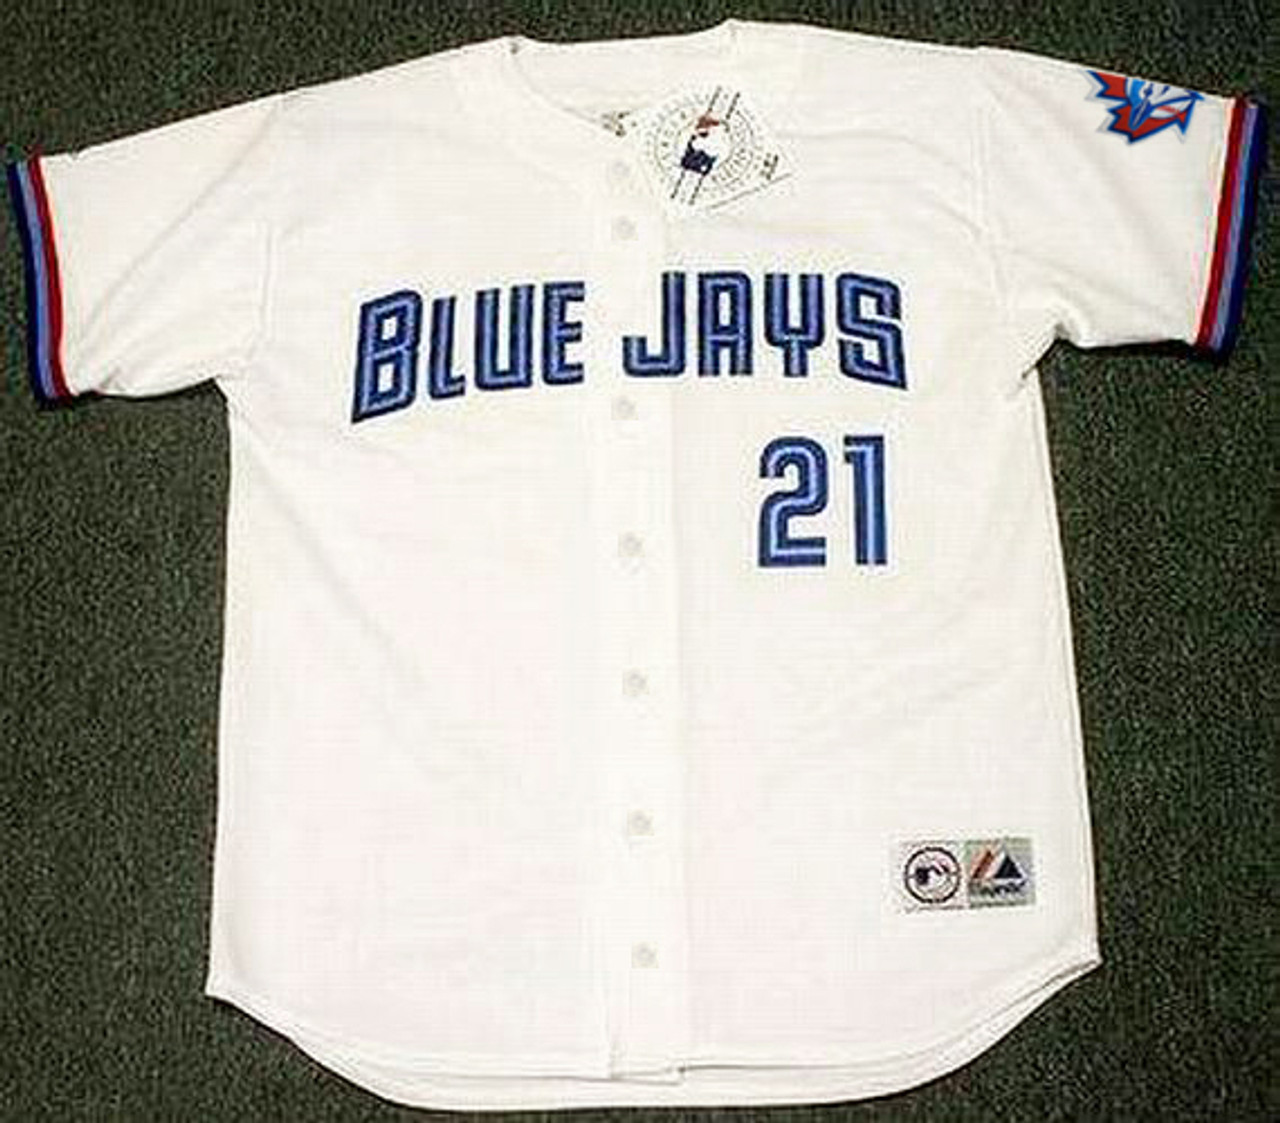 Toronto Blue Jays Red Canada Day Jersey Vintage 1997 No Name